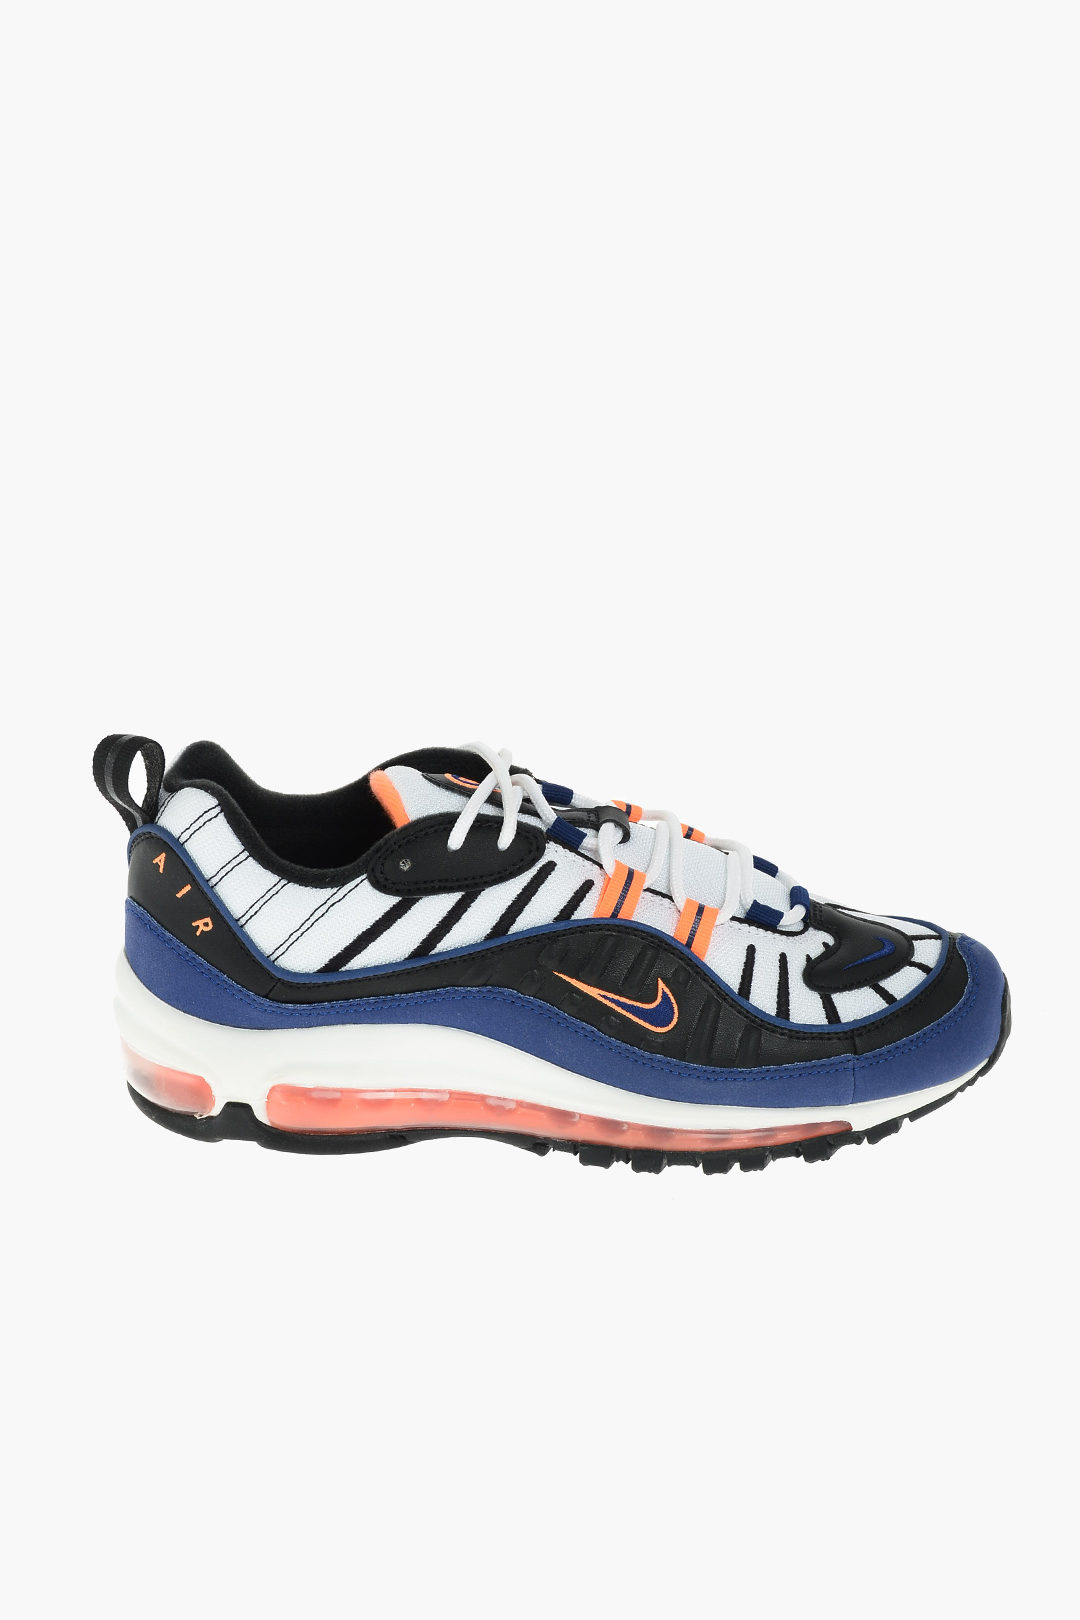 Citar Violar de repuesto Nike fabric AIR MAX 98 sneakers with faux leather details unisex men women  - Glamood Outlet